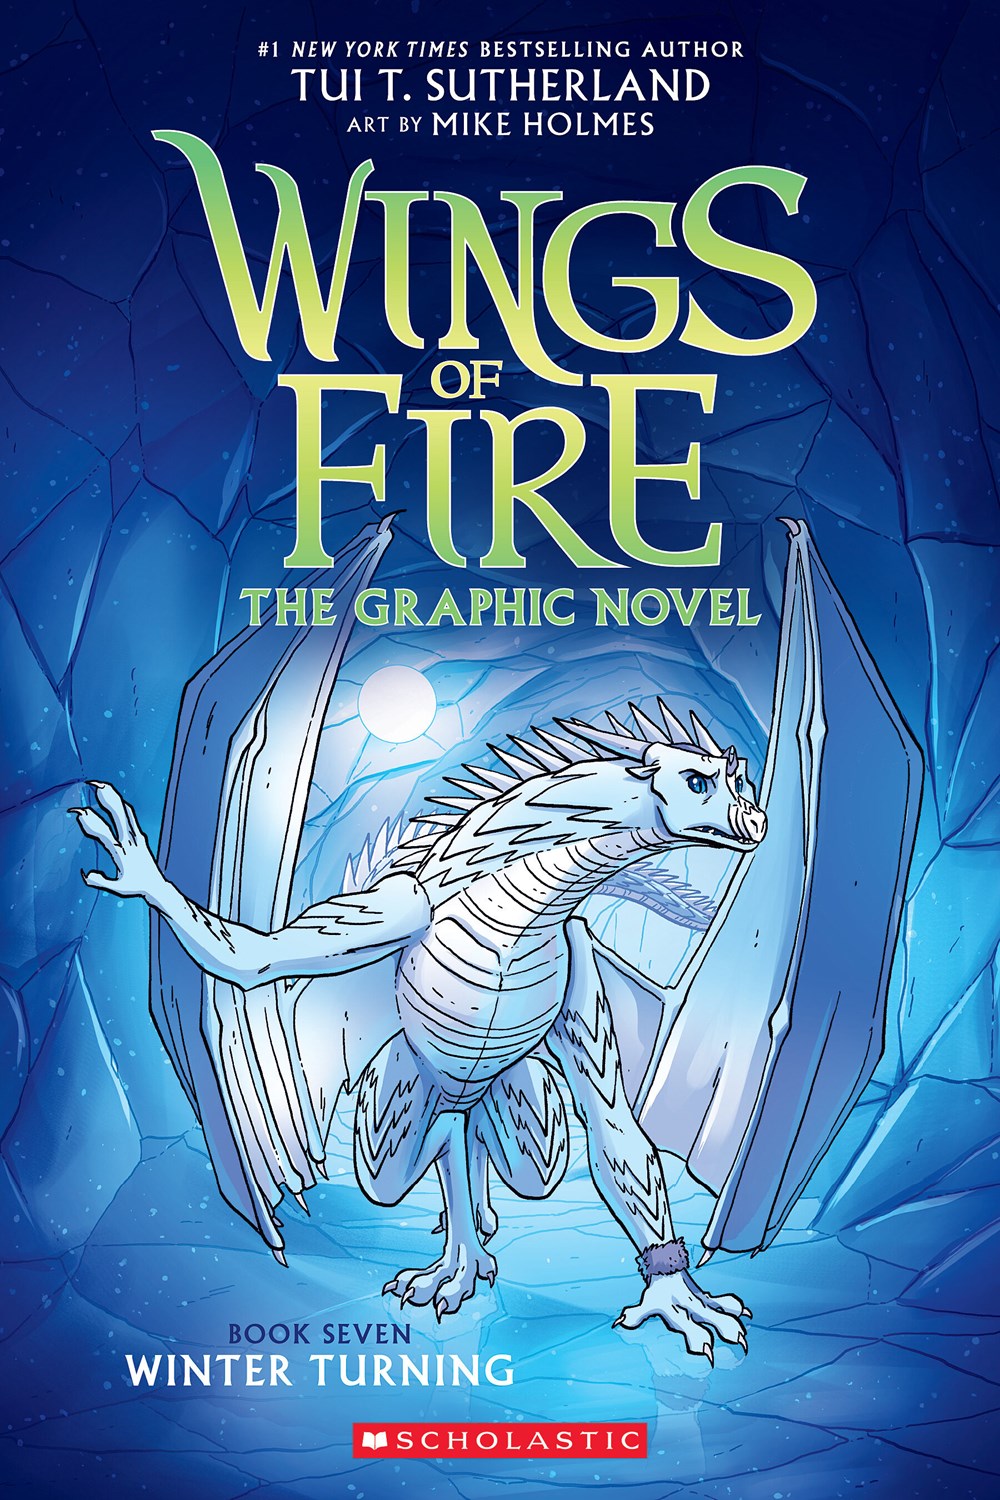 Winter Turning: Wings of Fire Graphic Novel #7 - Tui Sutherland